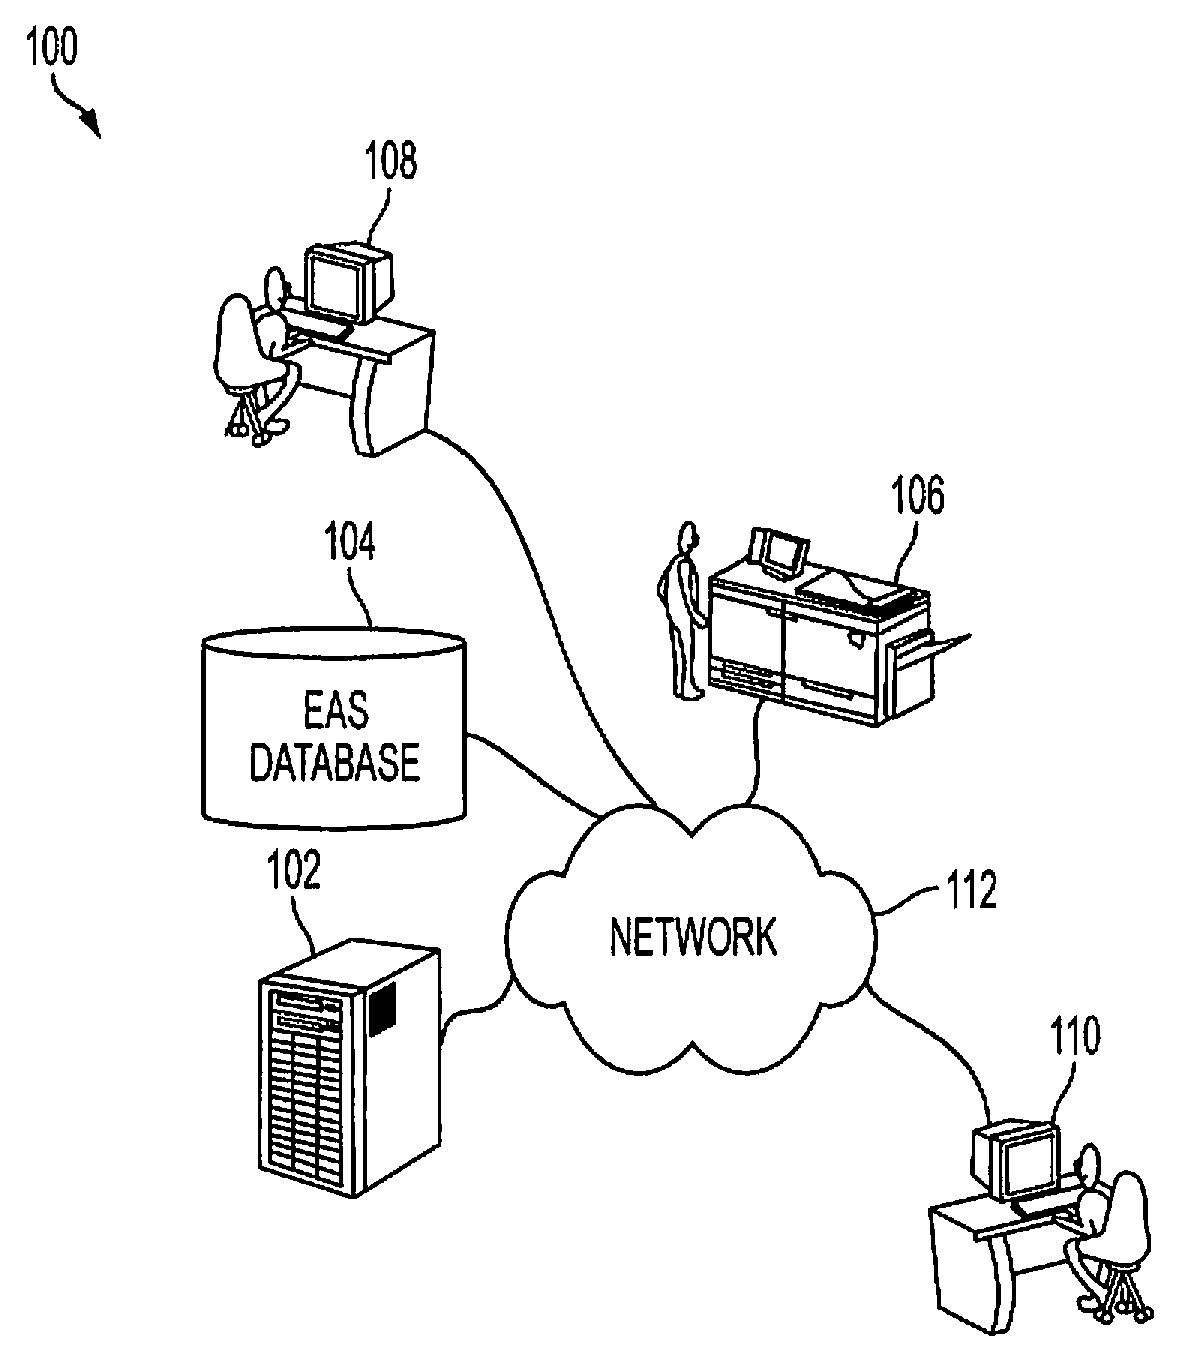 System and method for generating individualized educational practice worksheets